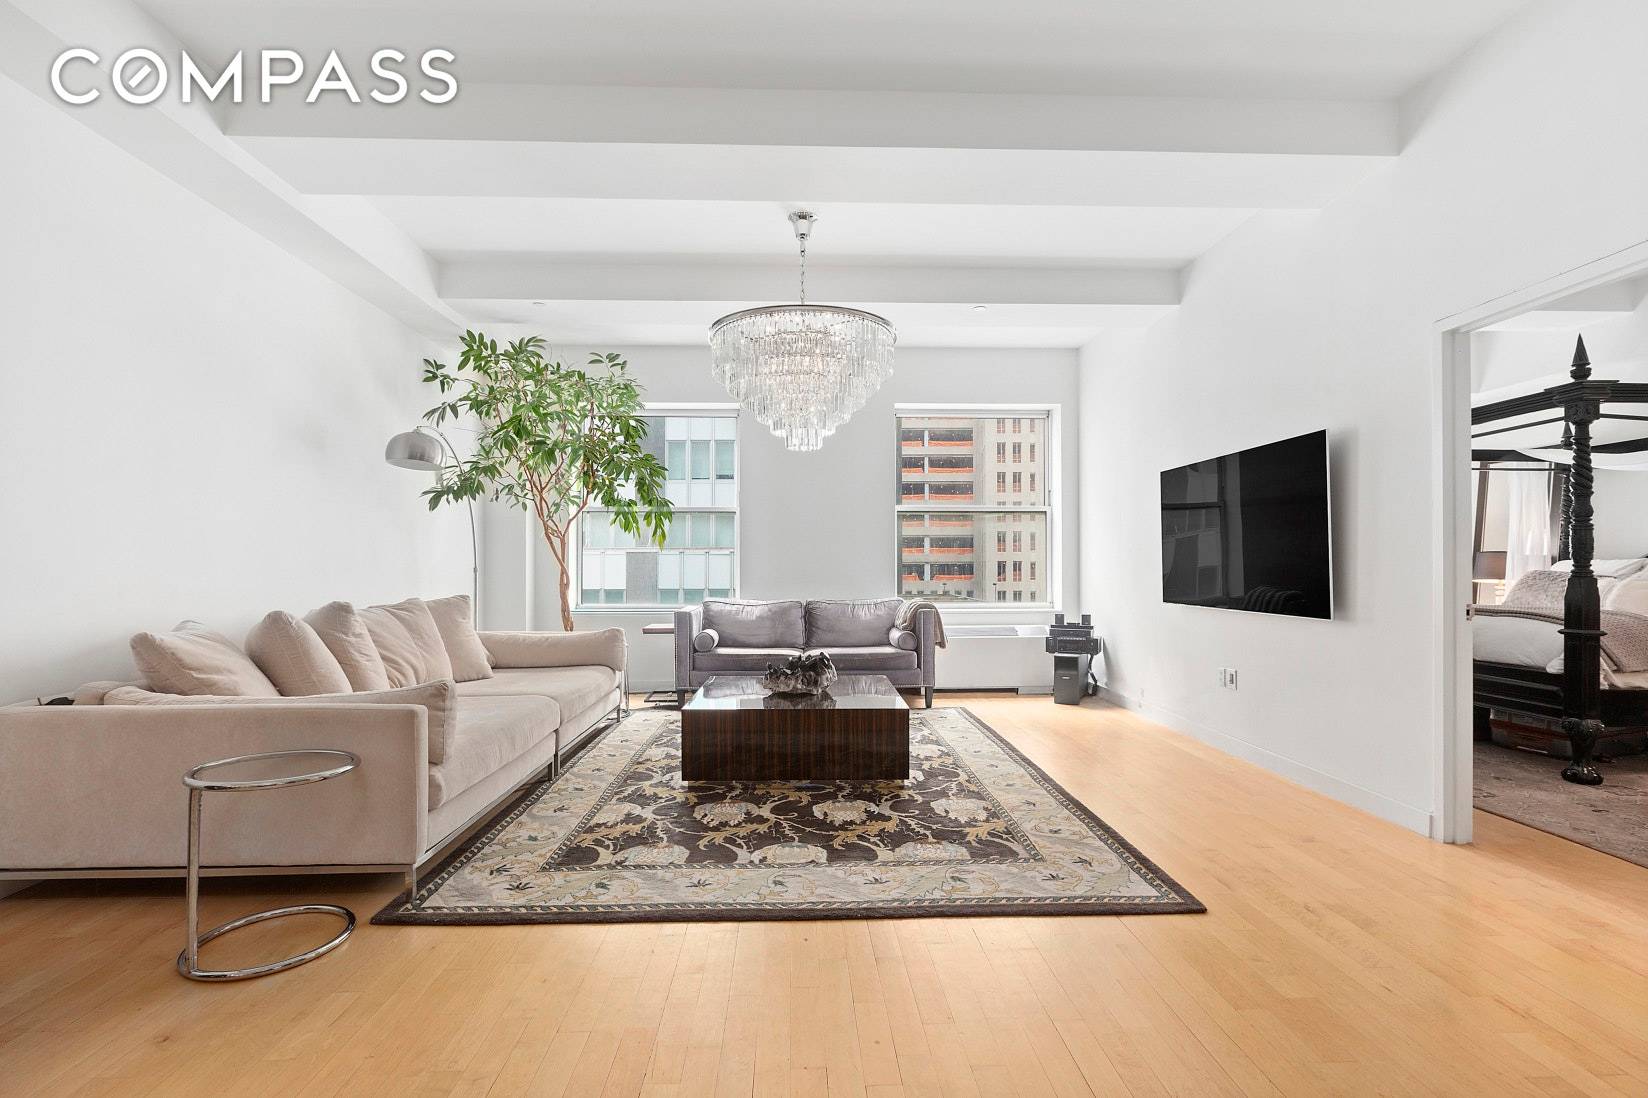 Combining effortless luxury and iconic city history, this expansive one bedroom plus home office, two bathroom loft residence is the epitome of FiDi refinement.